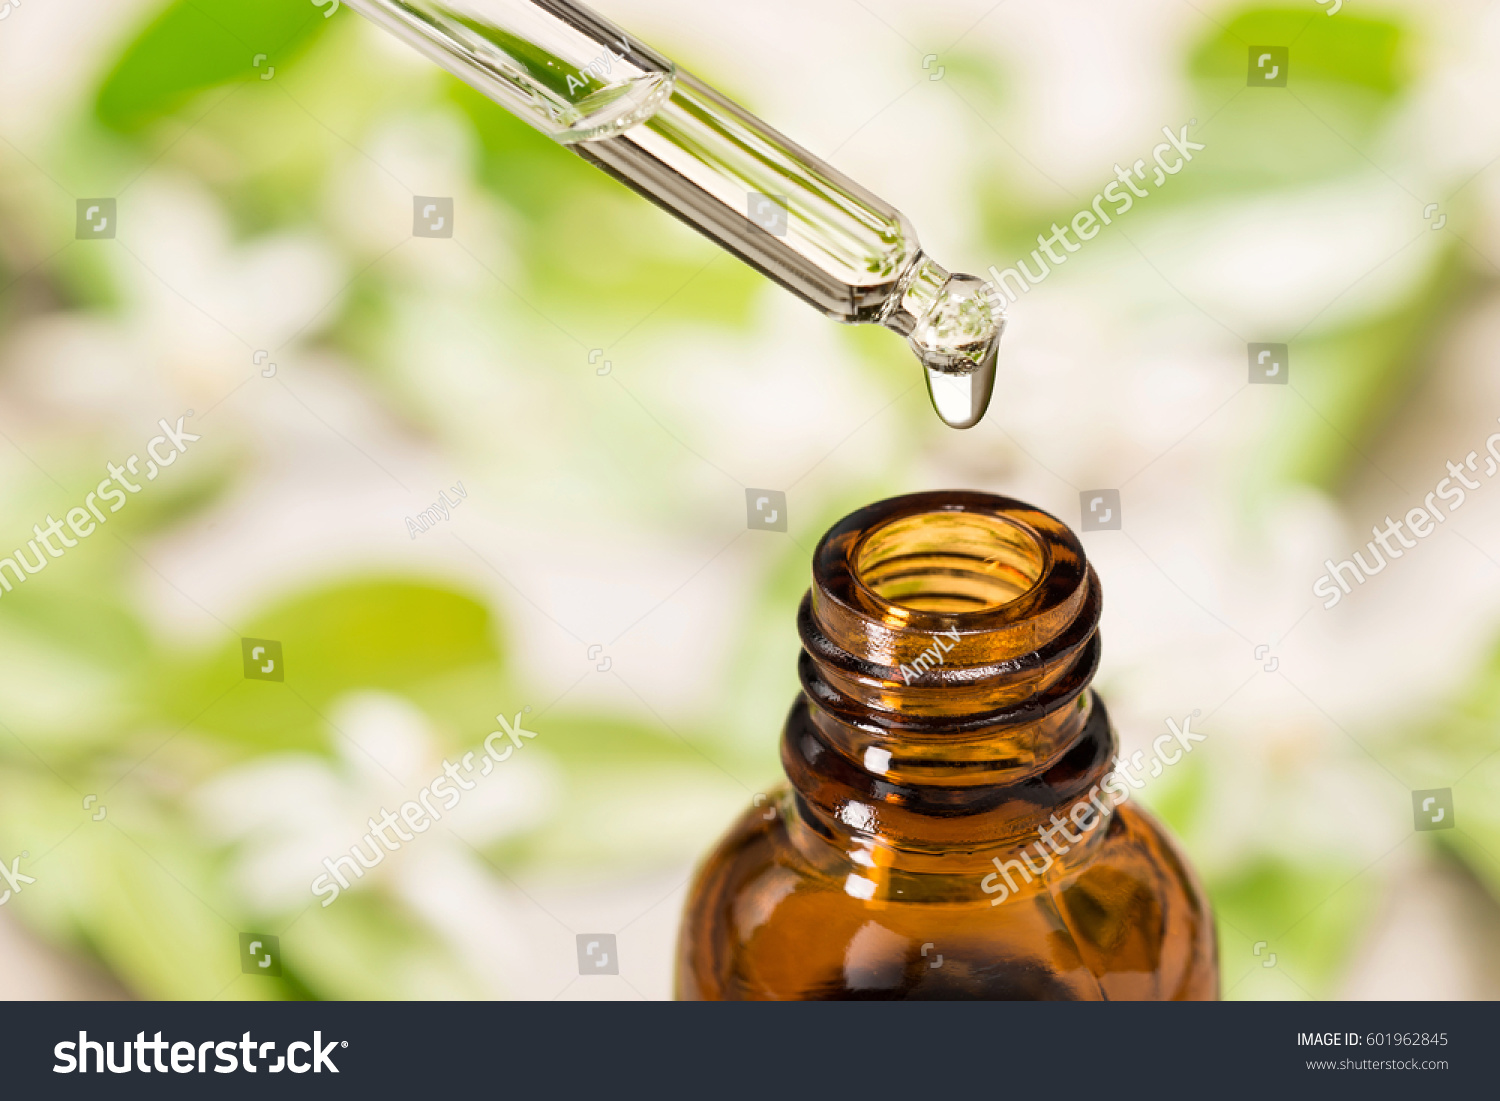 essential oil falling from glass dropper #601962845